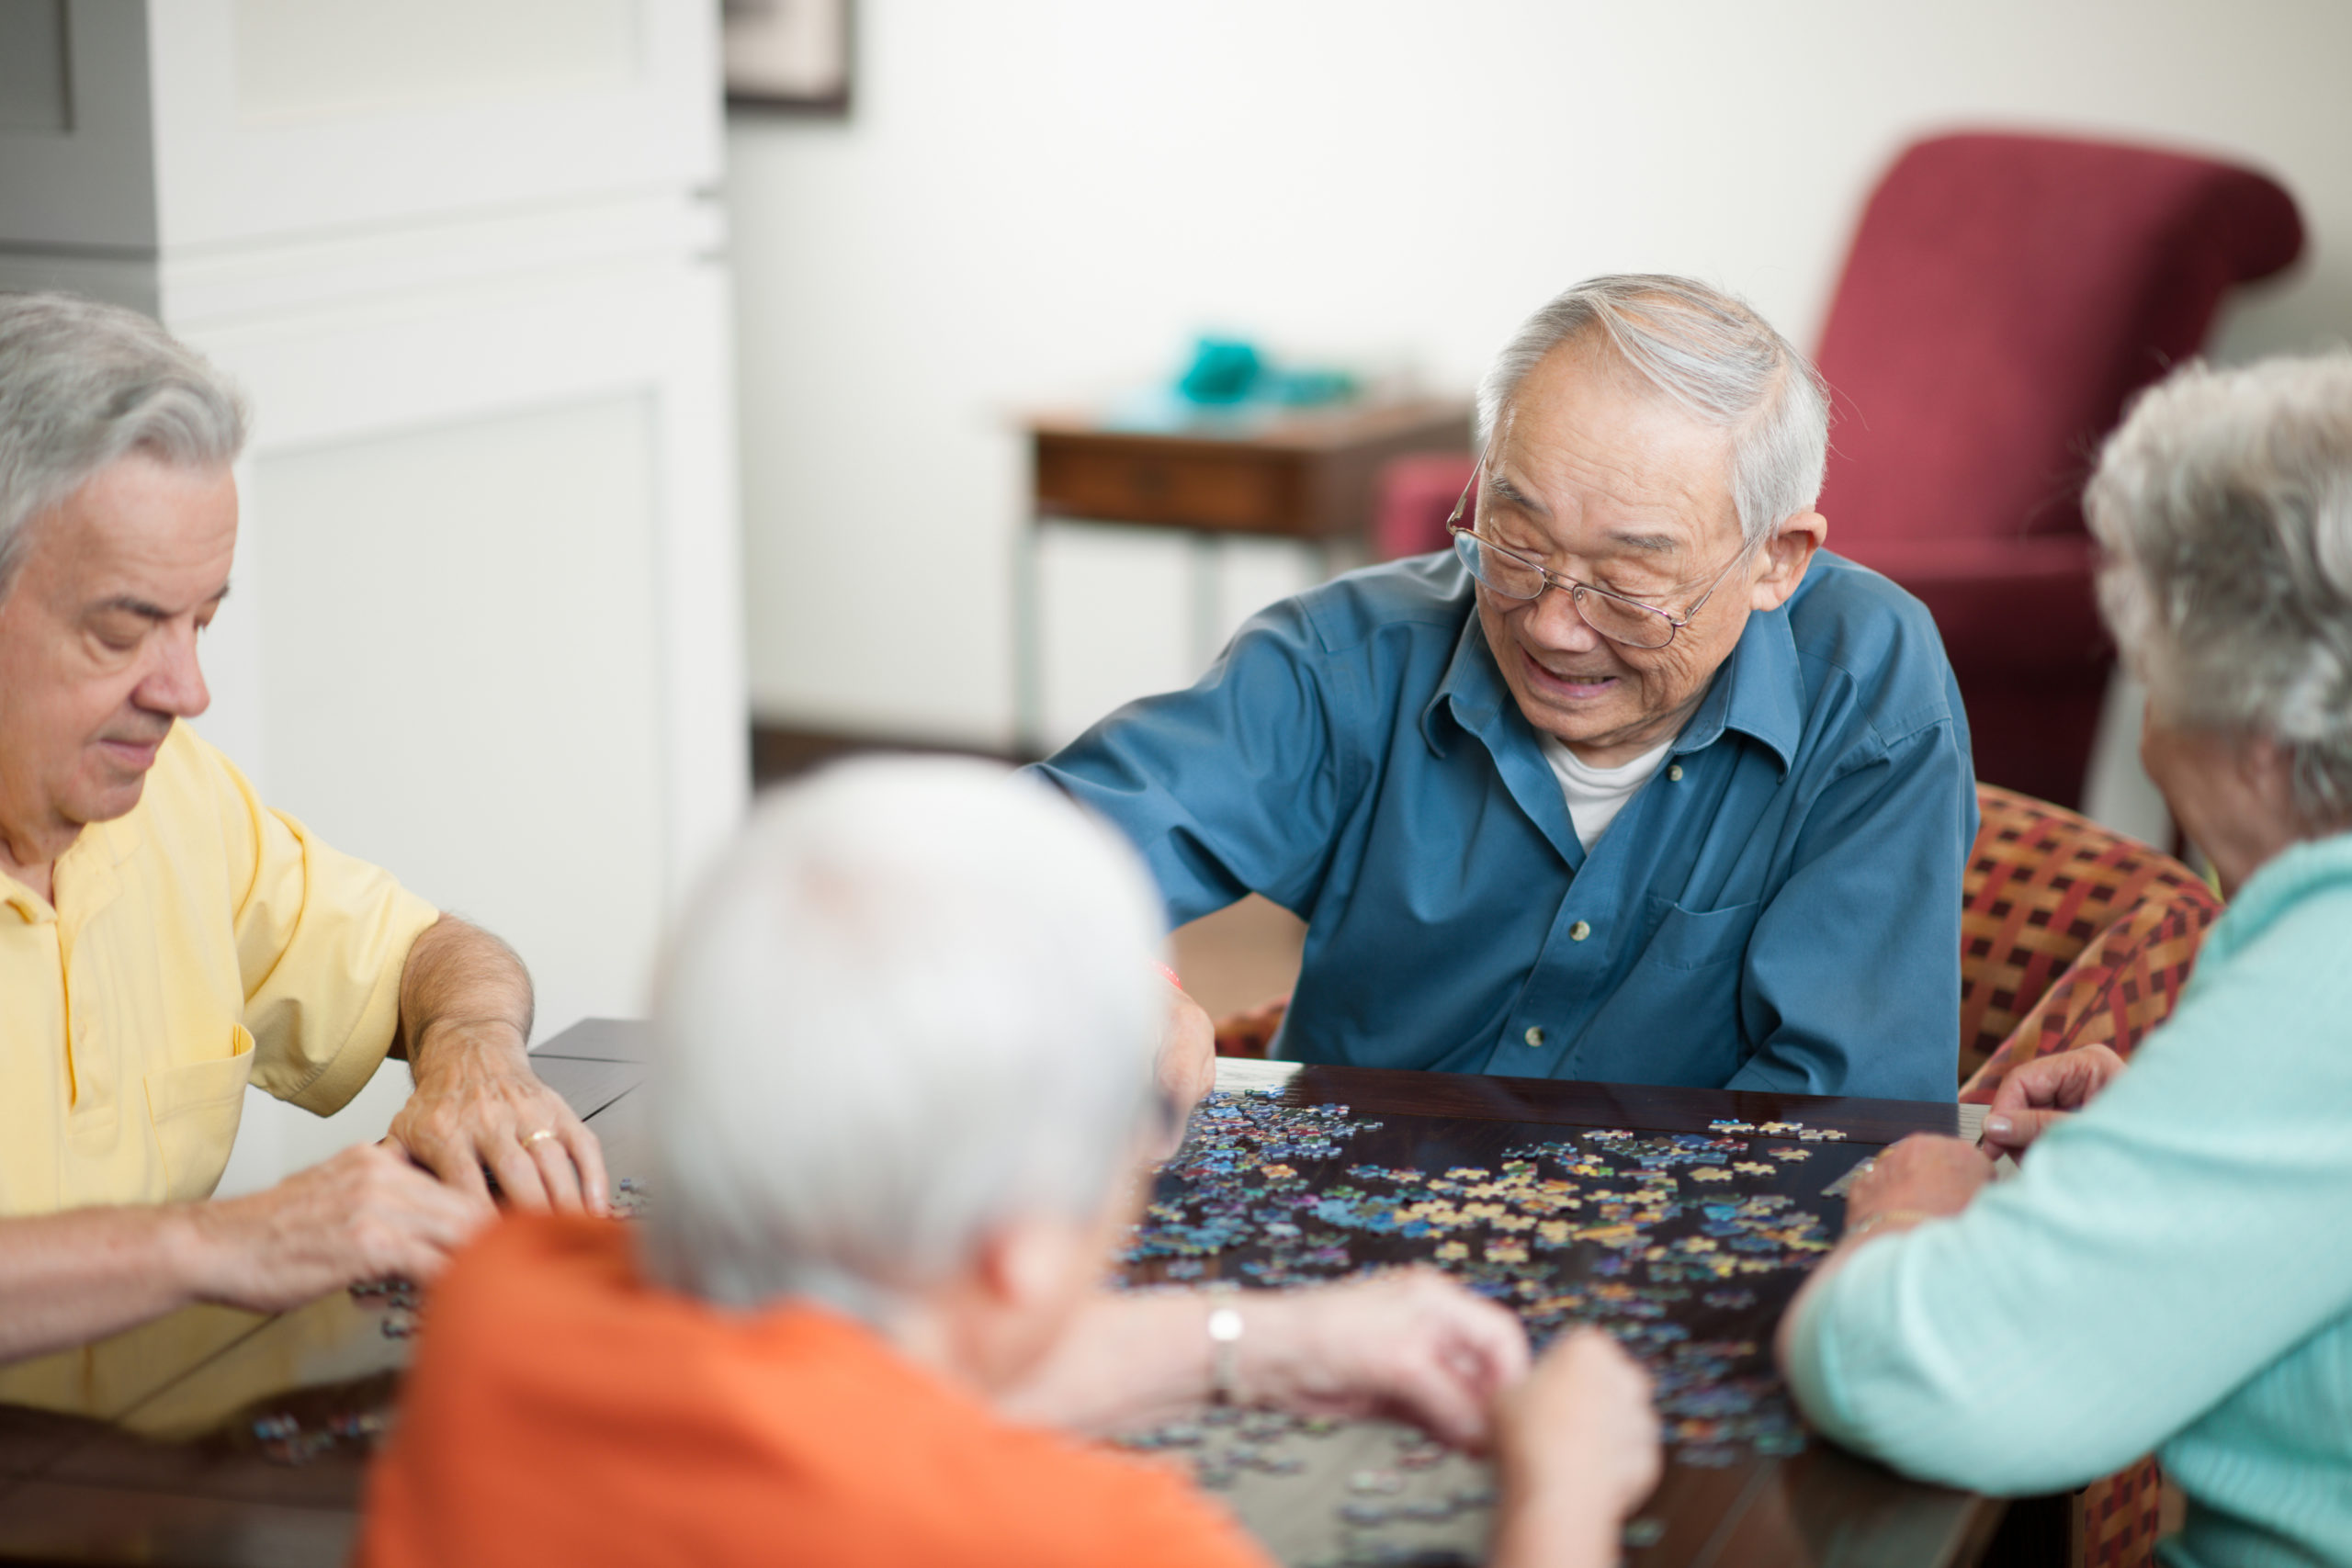 At St. Patrick's Manor we make it our top priority to keep our residents socially active